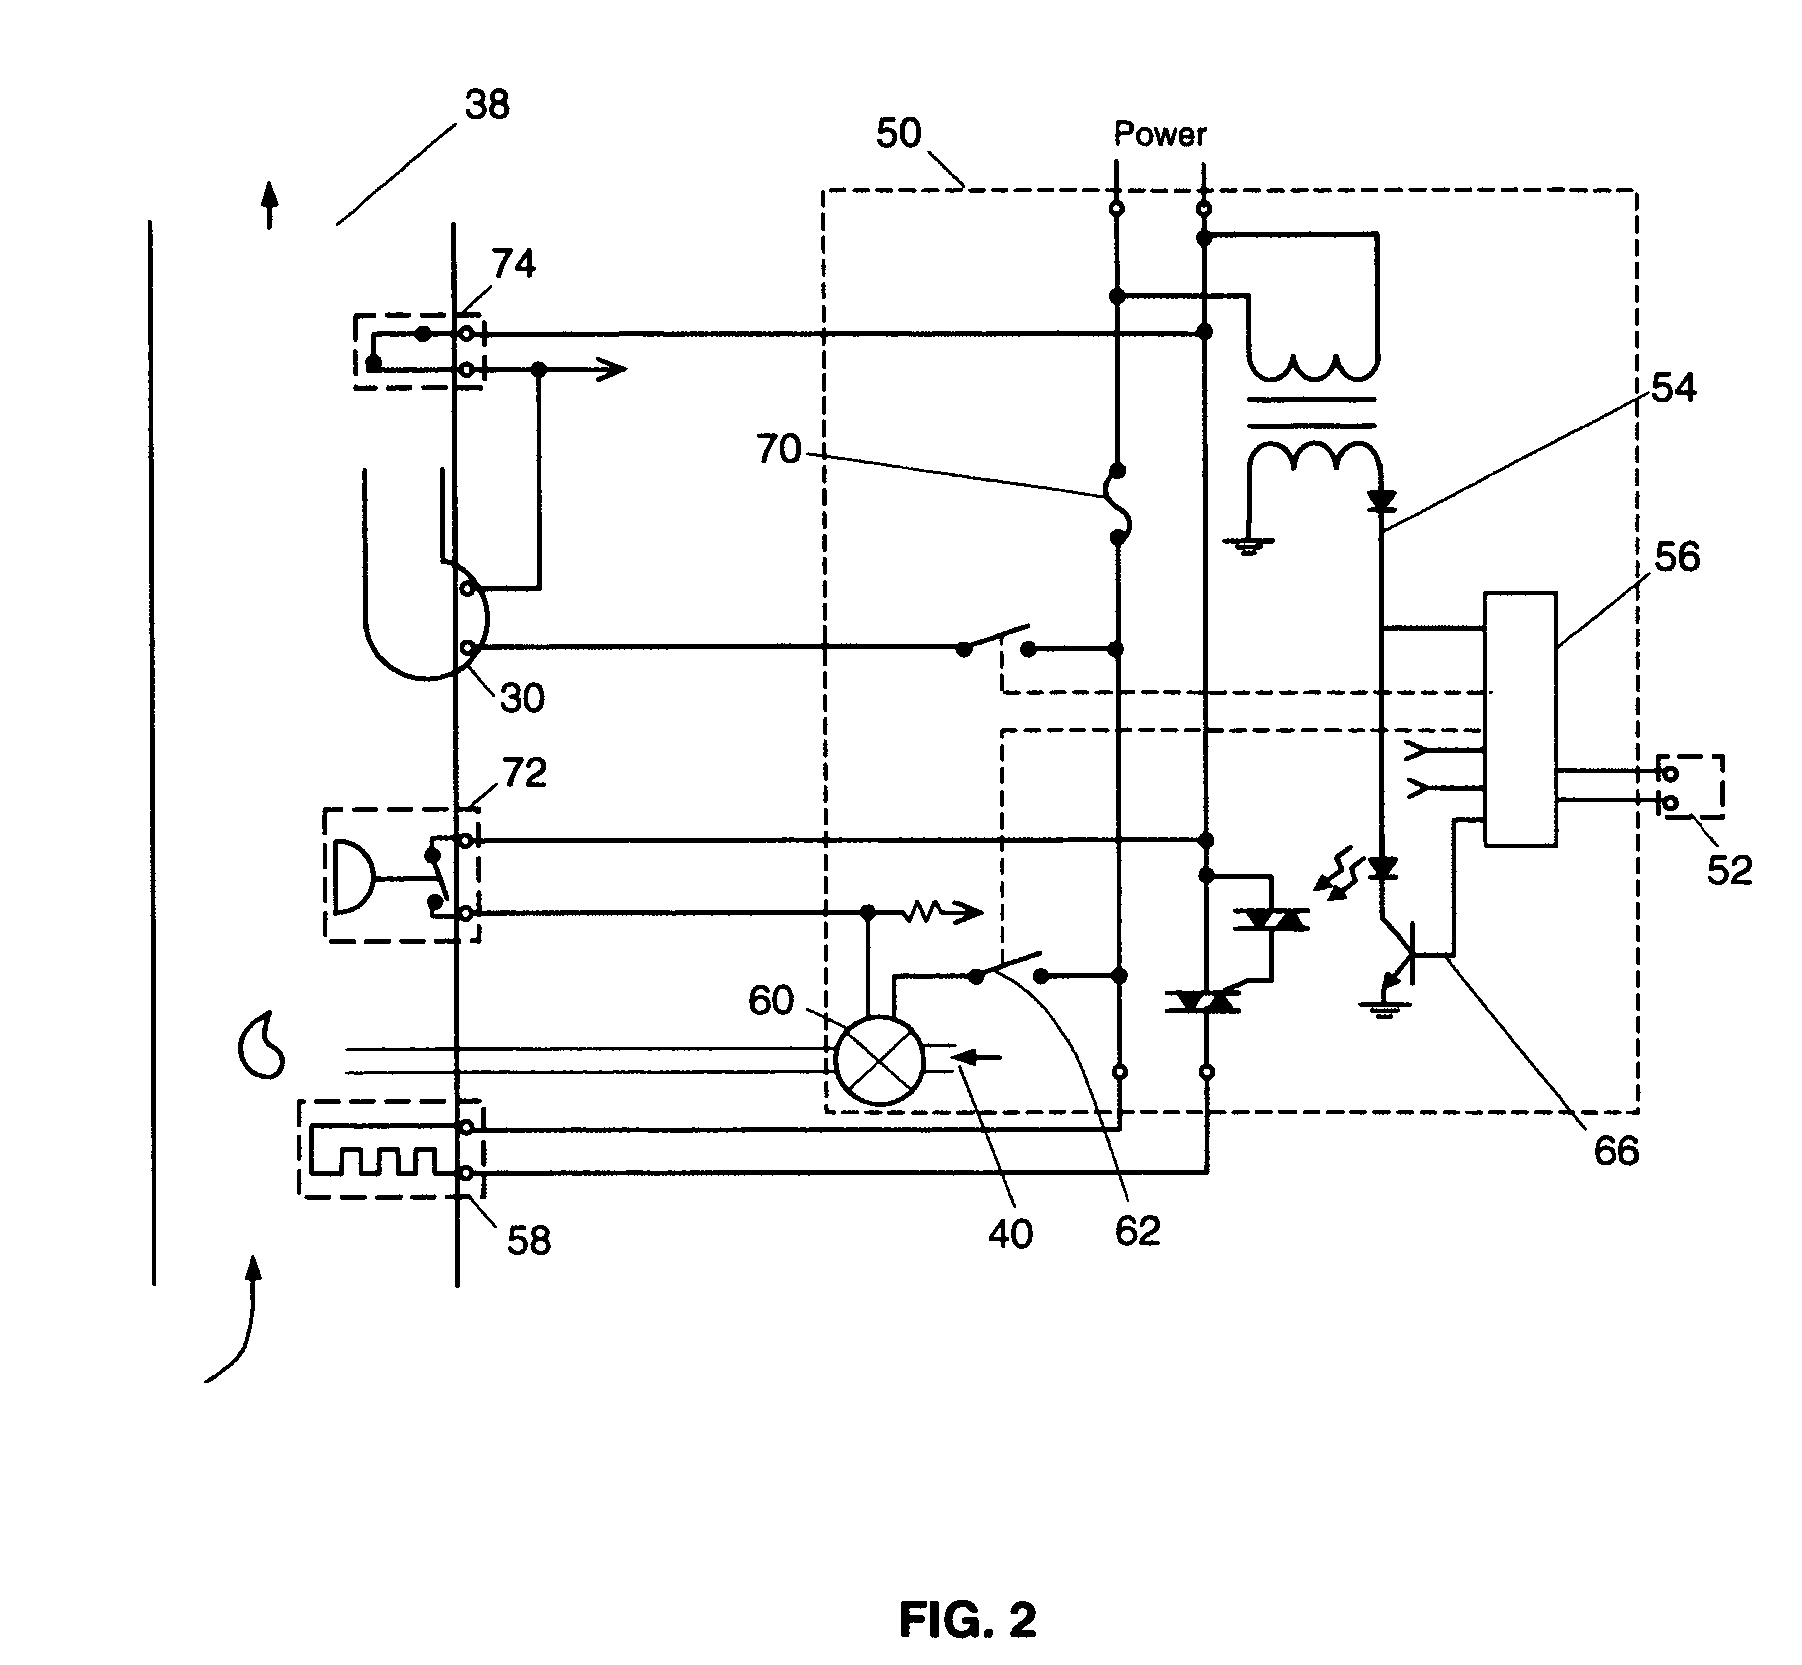 System and methods for controlling a water heater